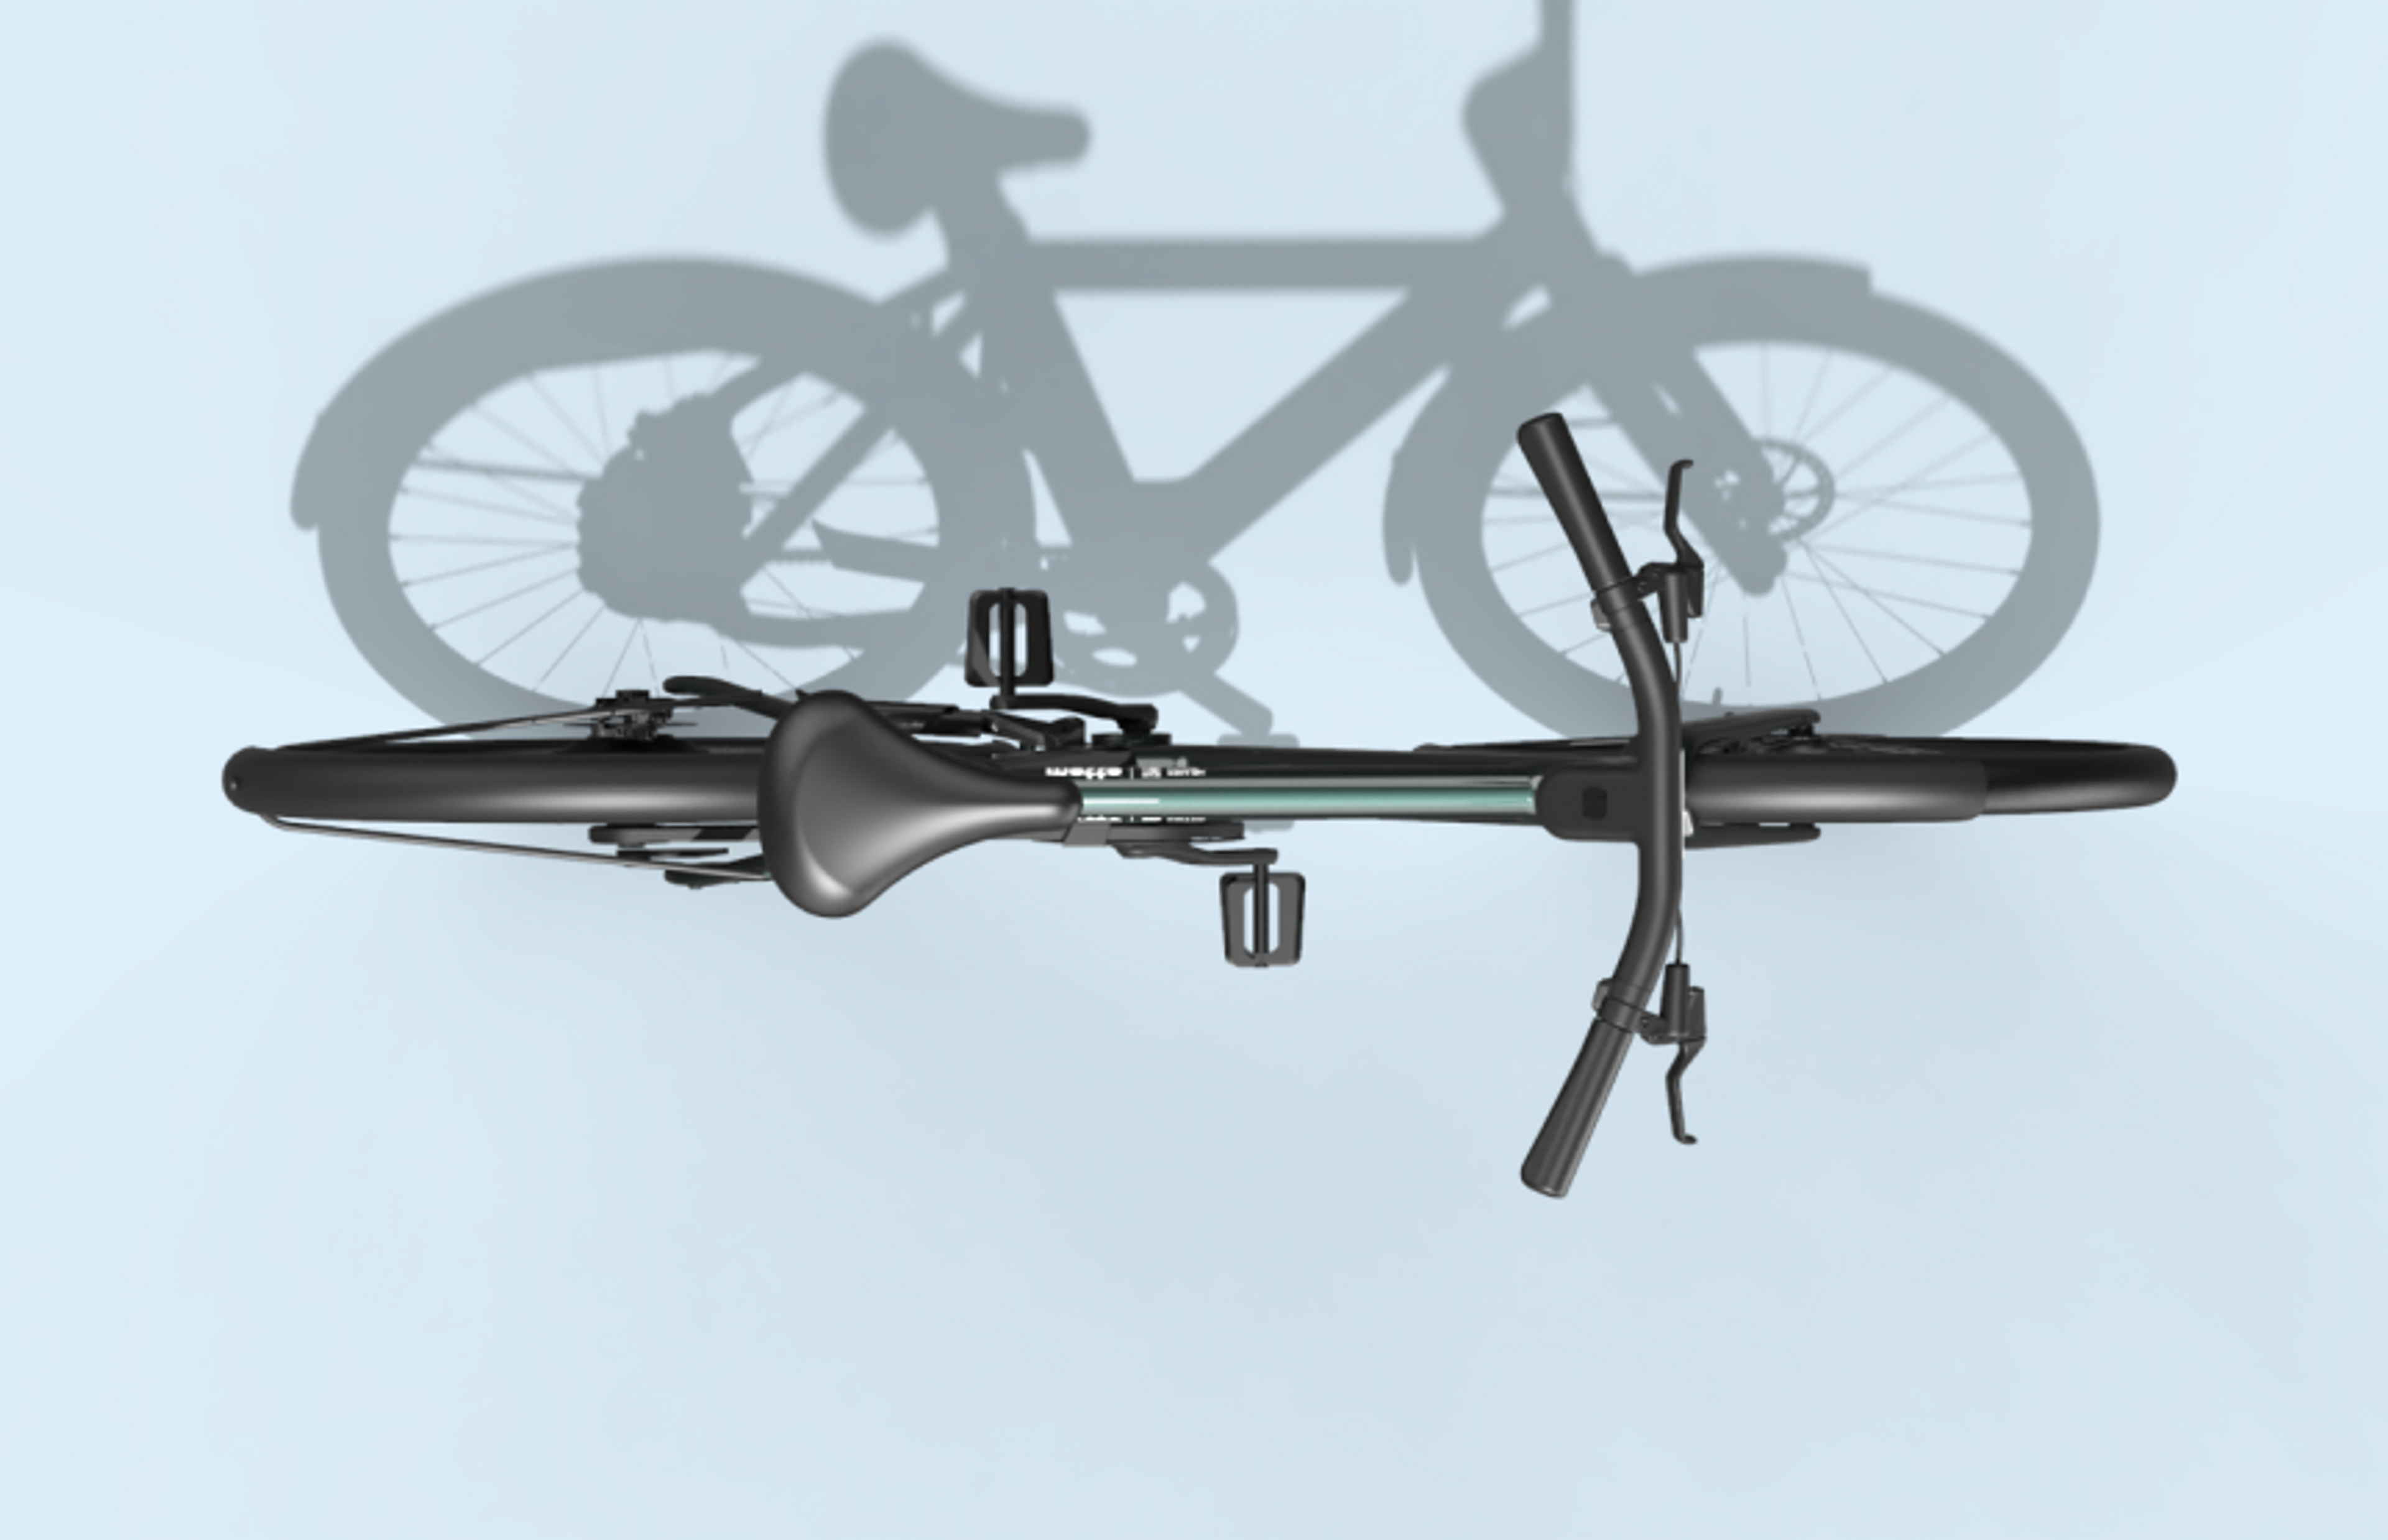 Top view of a Motto bike